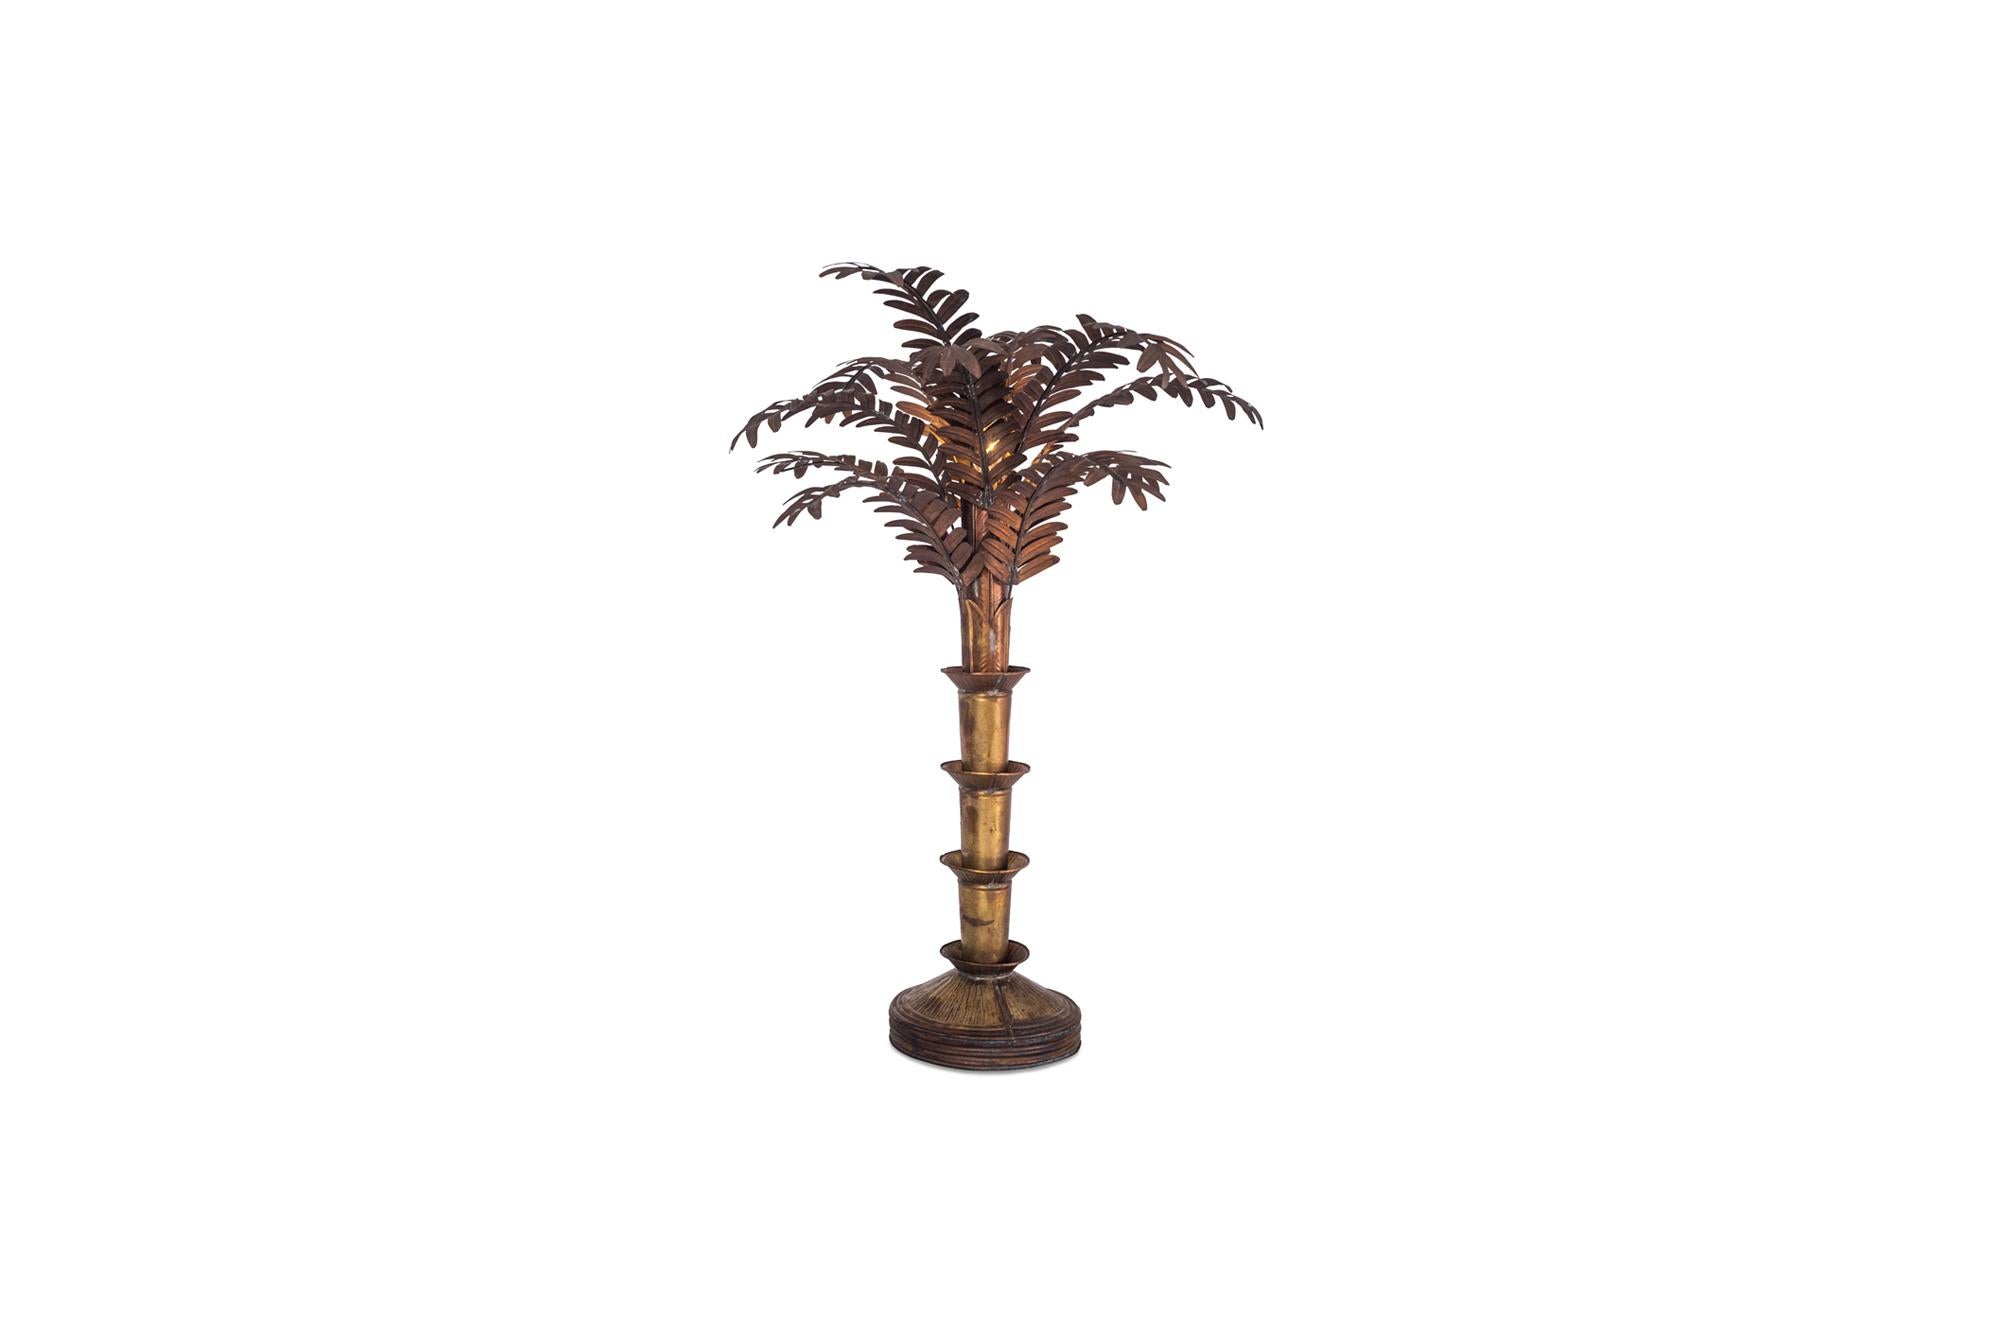 Hollywood Regency table lamp in the style of Maison Jansen. This elegant table lamp consists out of a well-crafted decorative copper stem with base and several removals branches, with handcrafted copper leafs. The complete lamp shows a light,